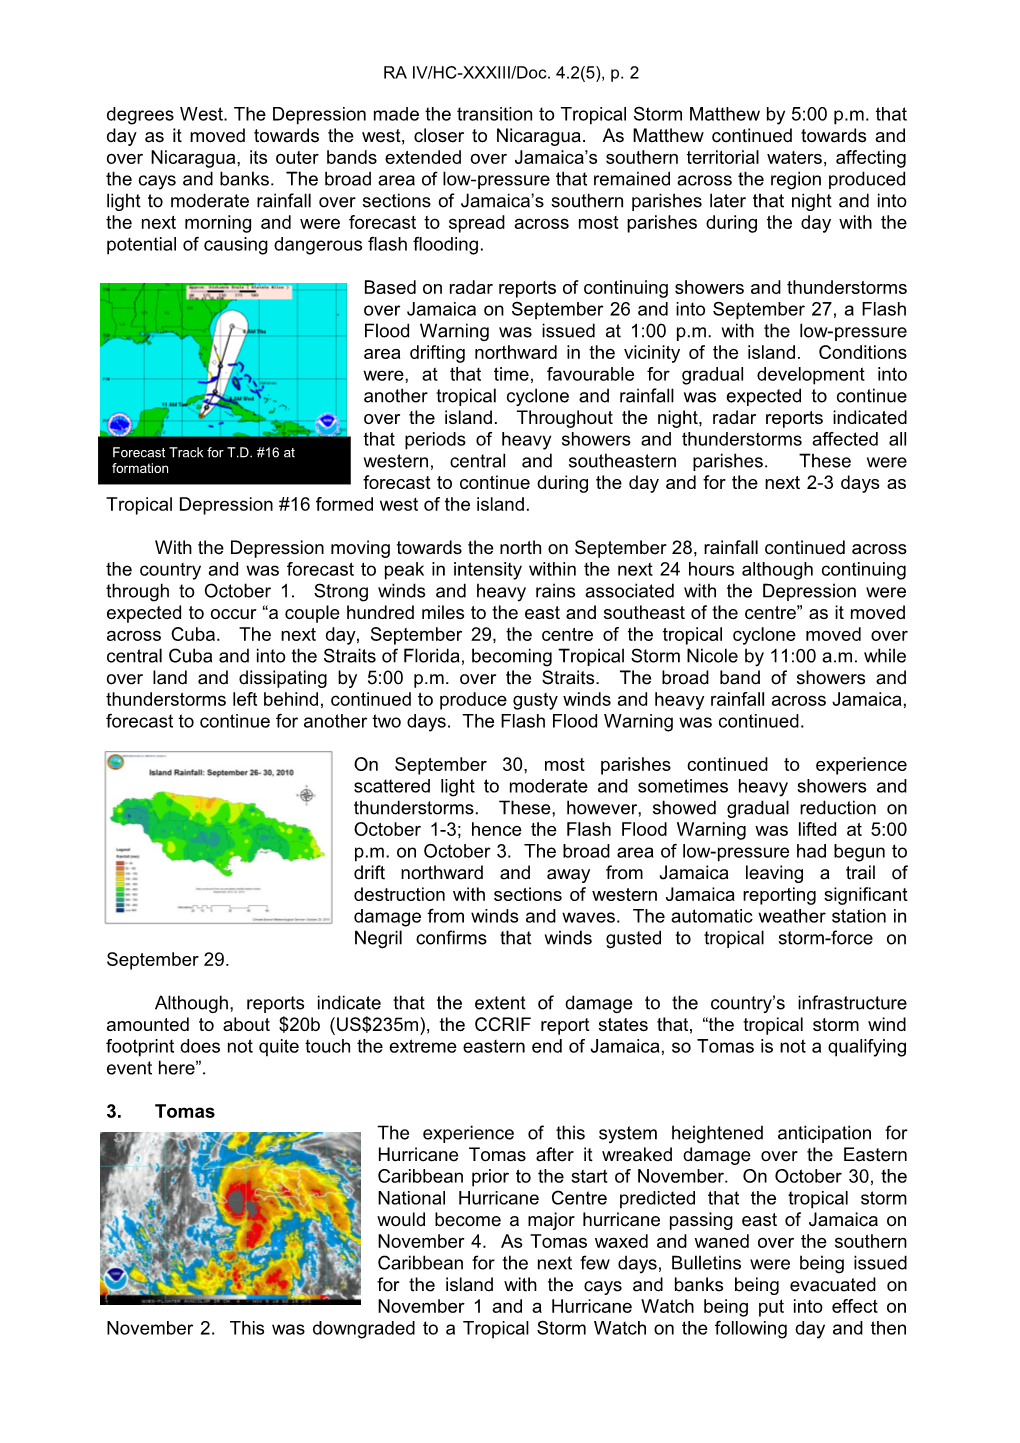 REPORT by Roger Williams, Bermuda Weather Service